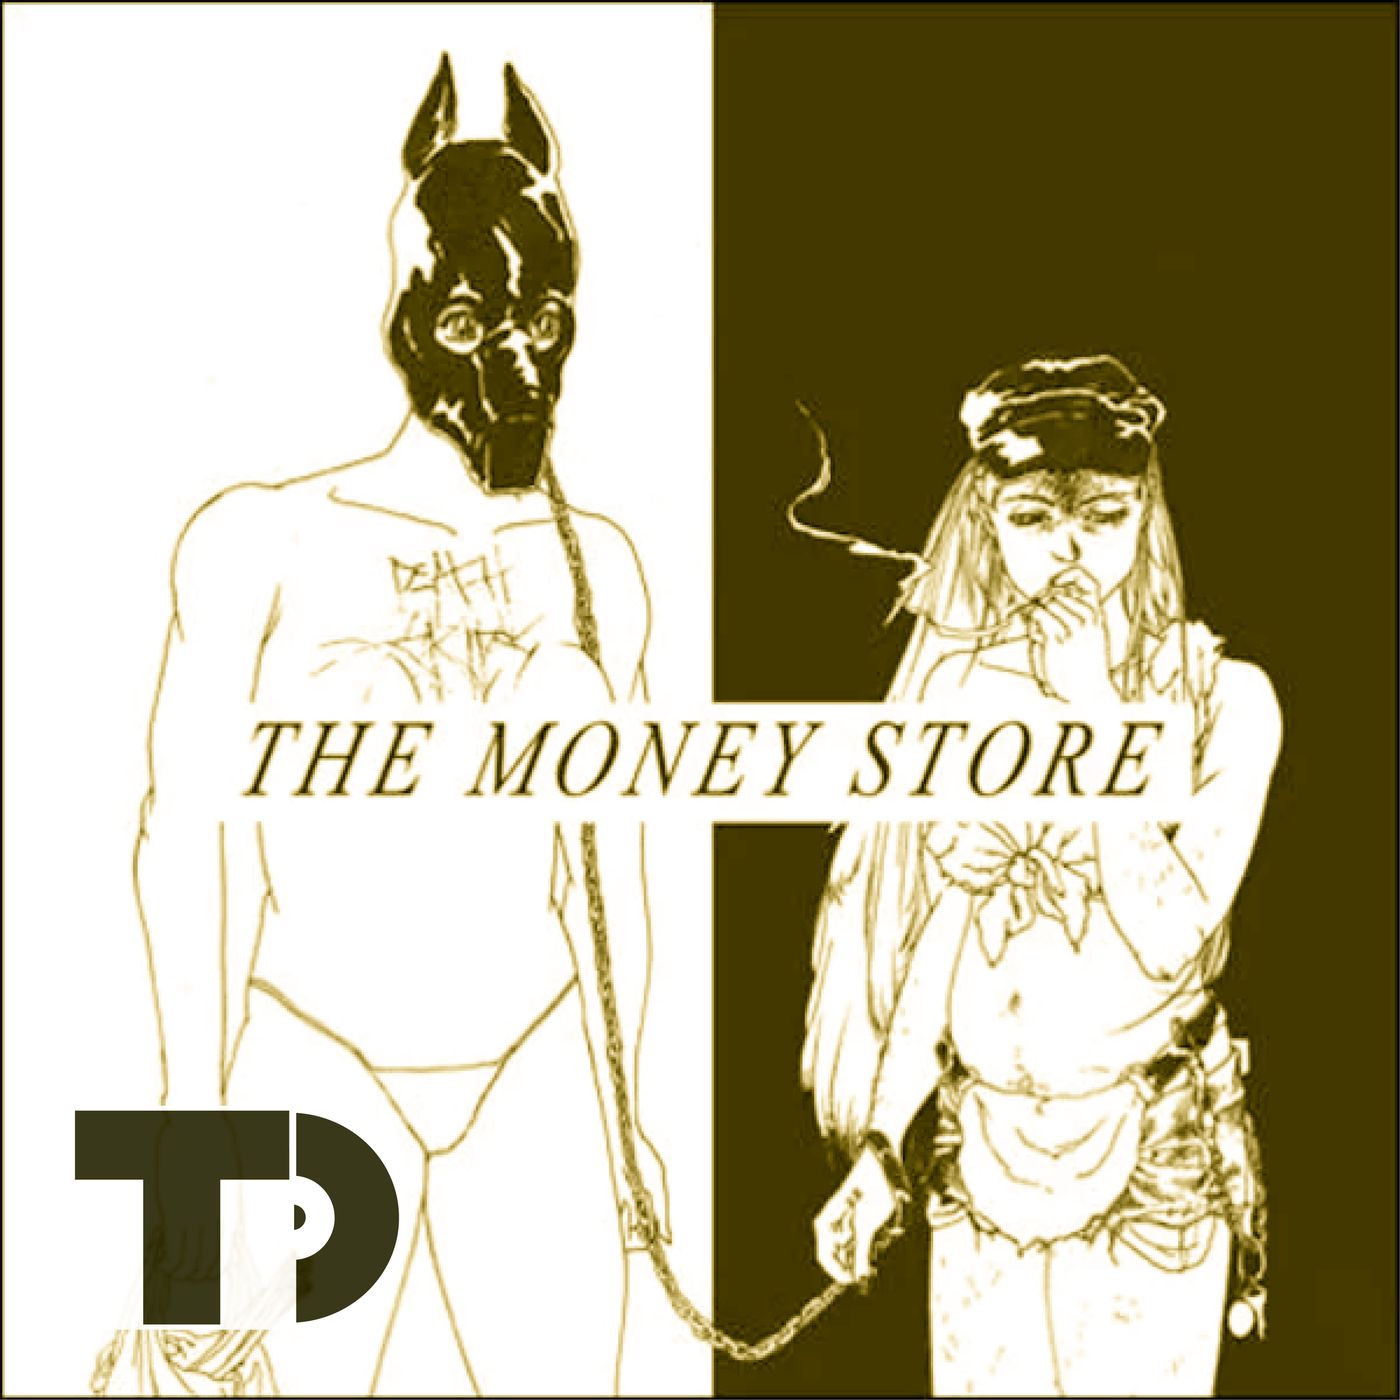 Episode 39: Death Grips's "The Money Store"